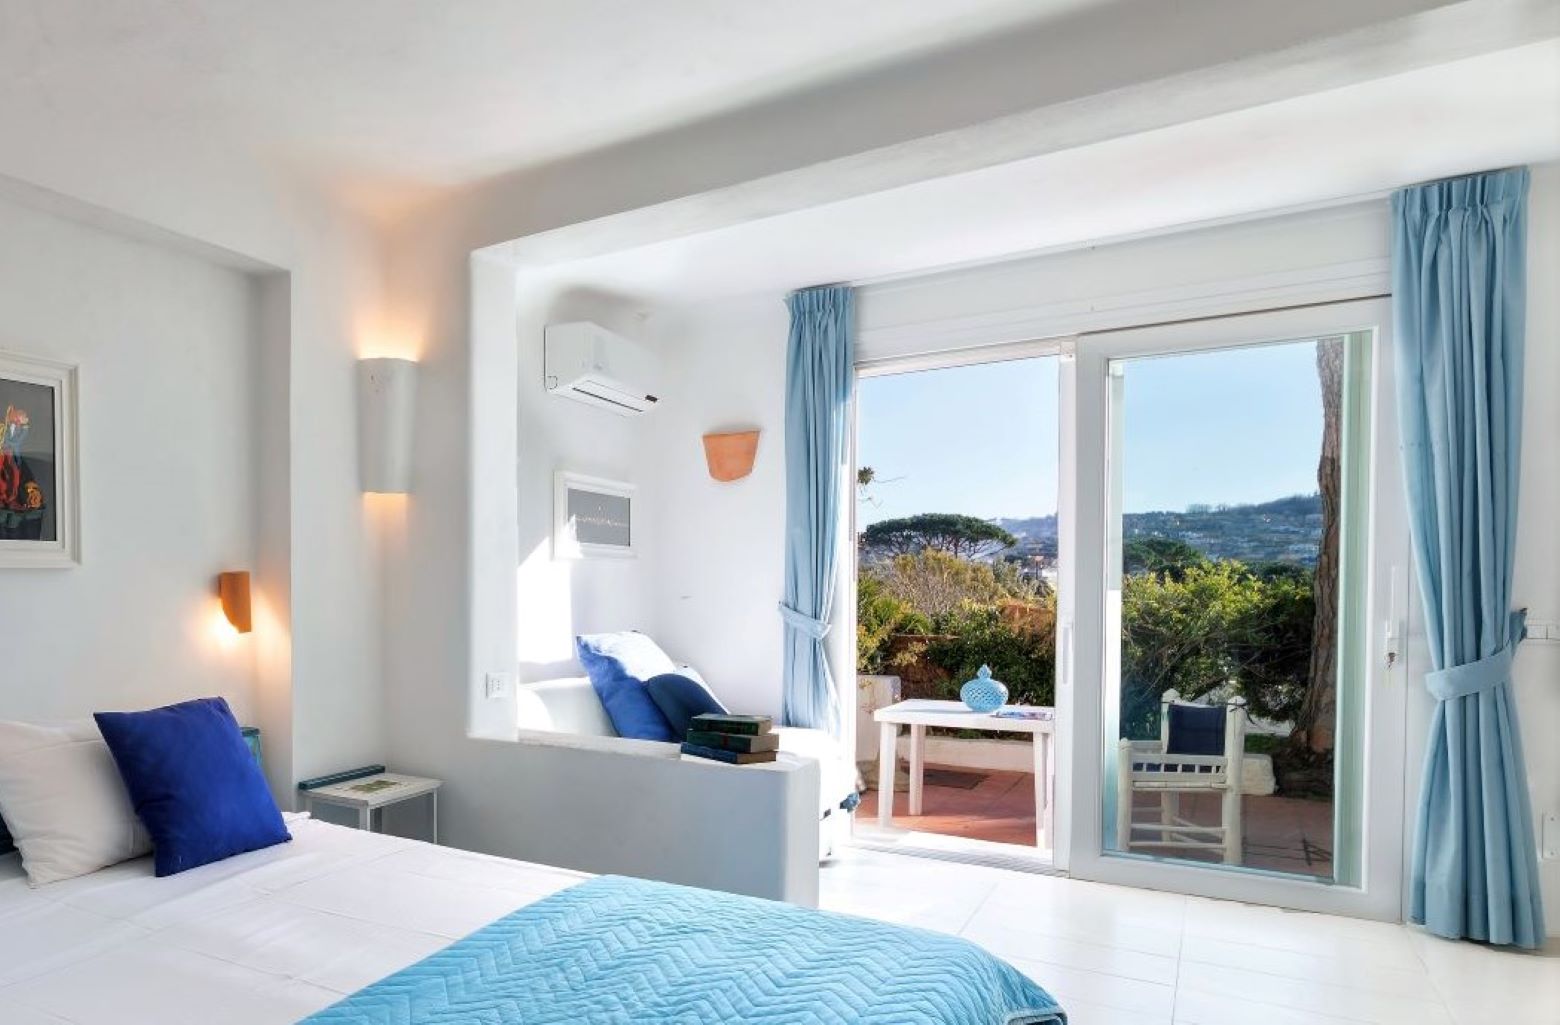 Ischia Room for Bed and breakfast accommodation